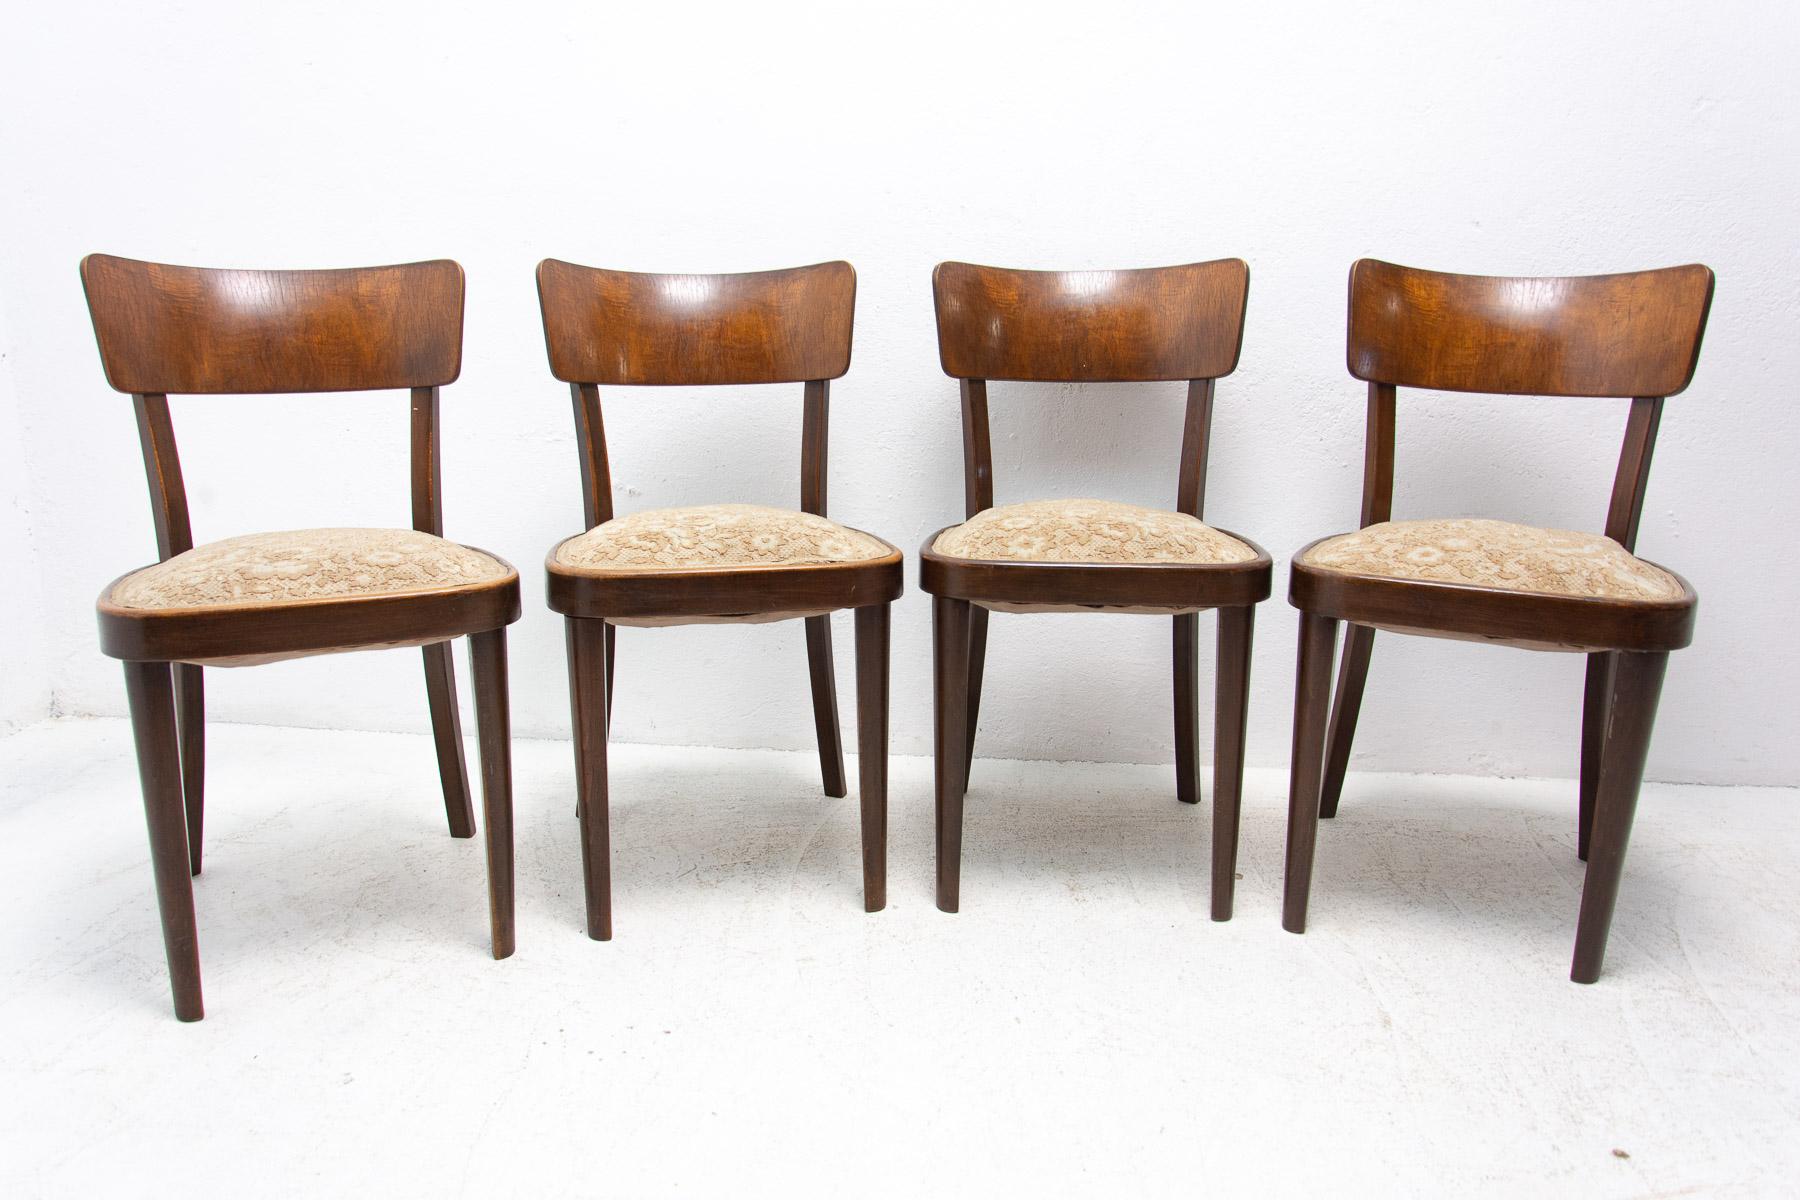 Dining chairs made in Czechoslovakia 1950´s. Walnut veneer, upholstered seats. In very good Vintage condition, with wear appropriate for the age of chairs. Price is for the set of four.

Measures: Height: 81 cm

Seat: 44×43 cm

Seat height: 48